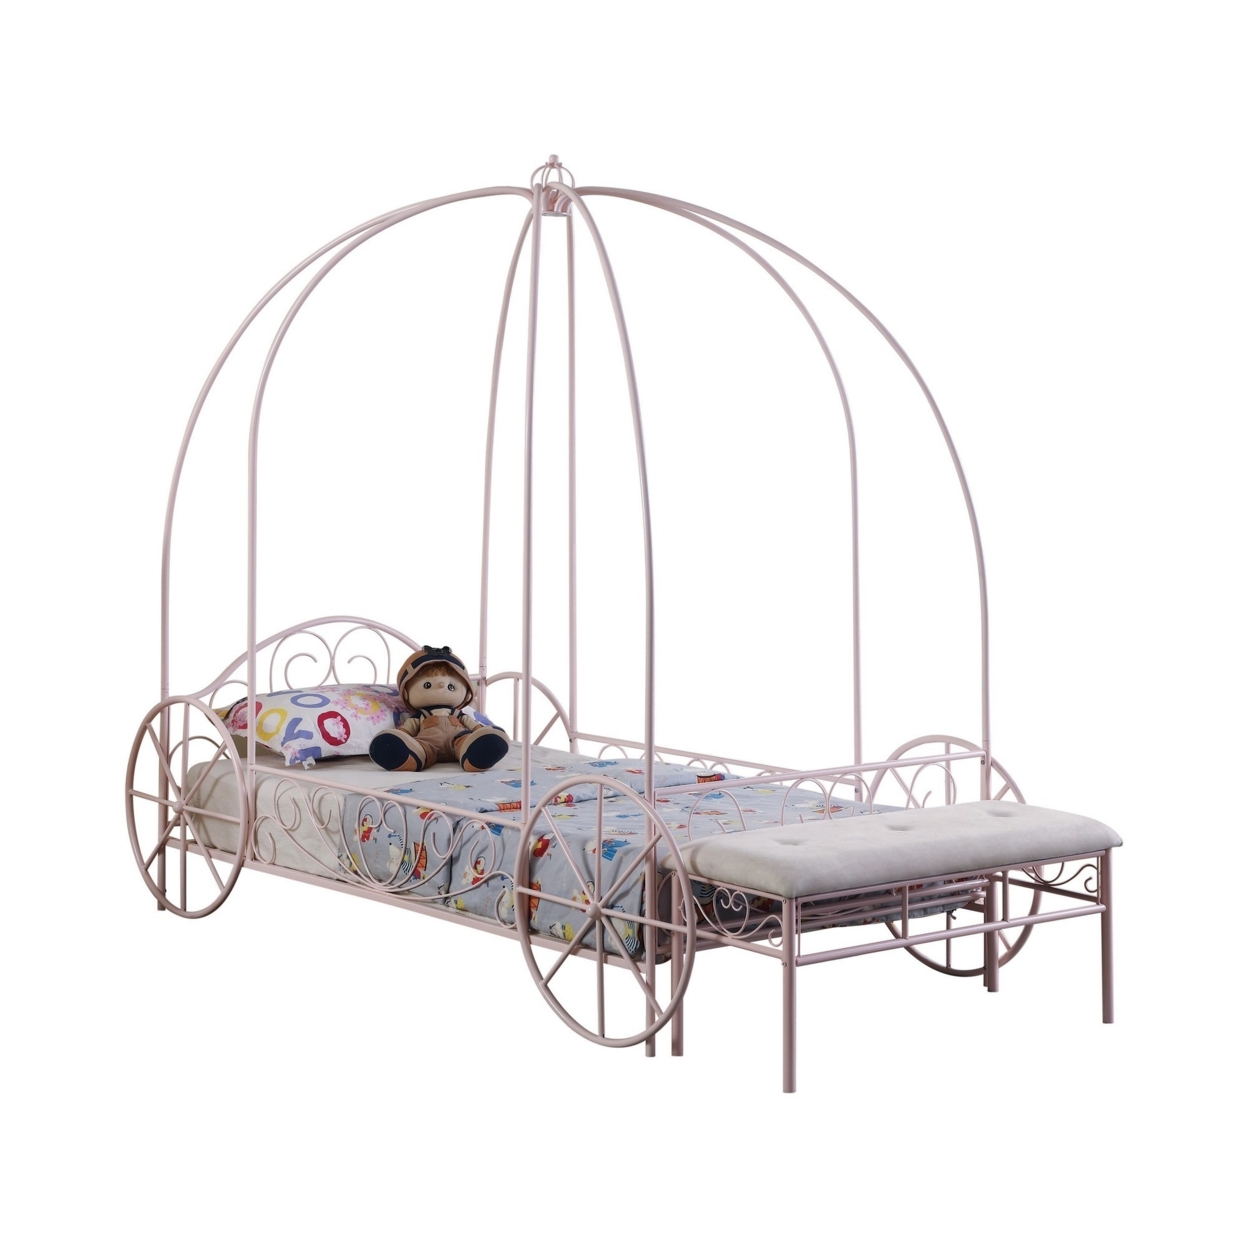 Modern Twin Size Canopy Bed, Princess Carriage Design, Powder Pink